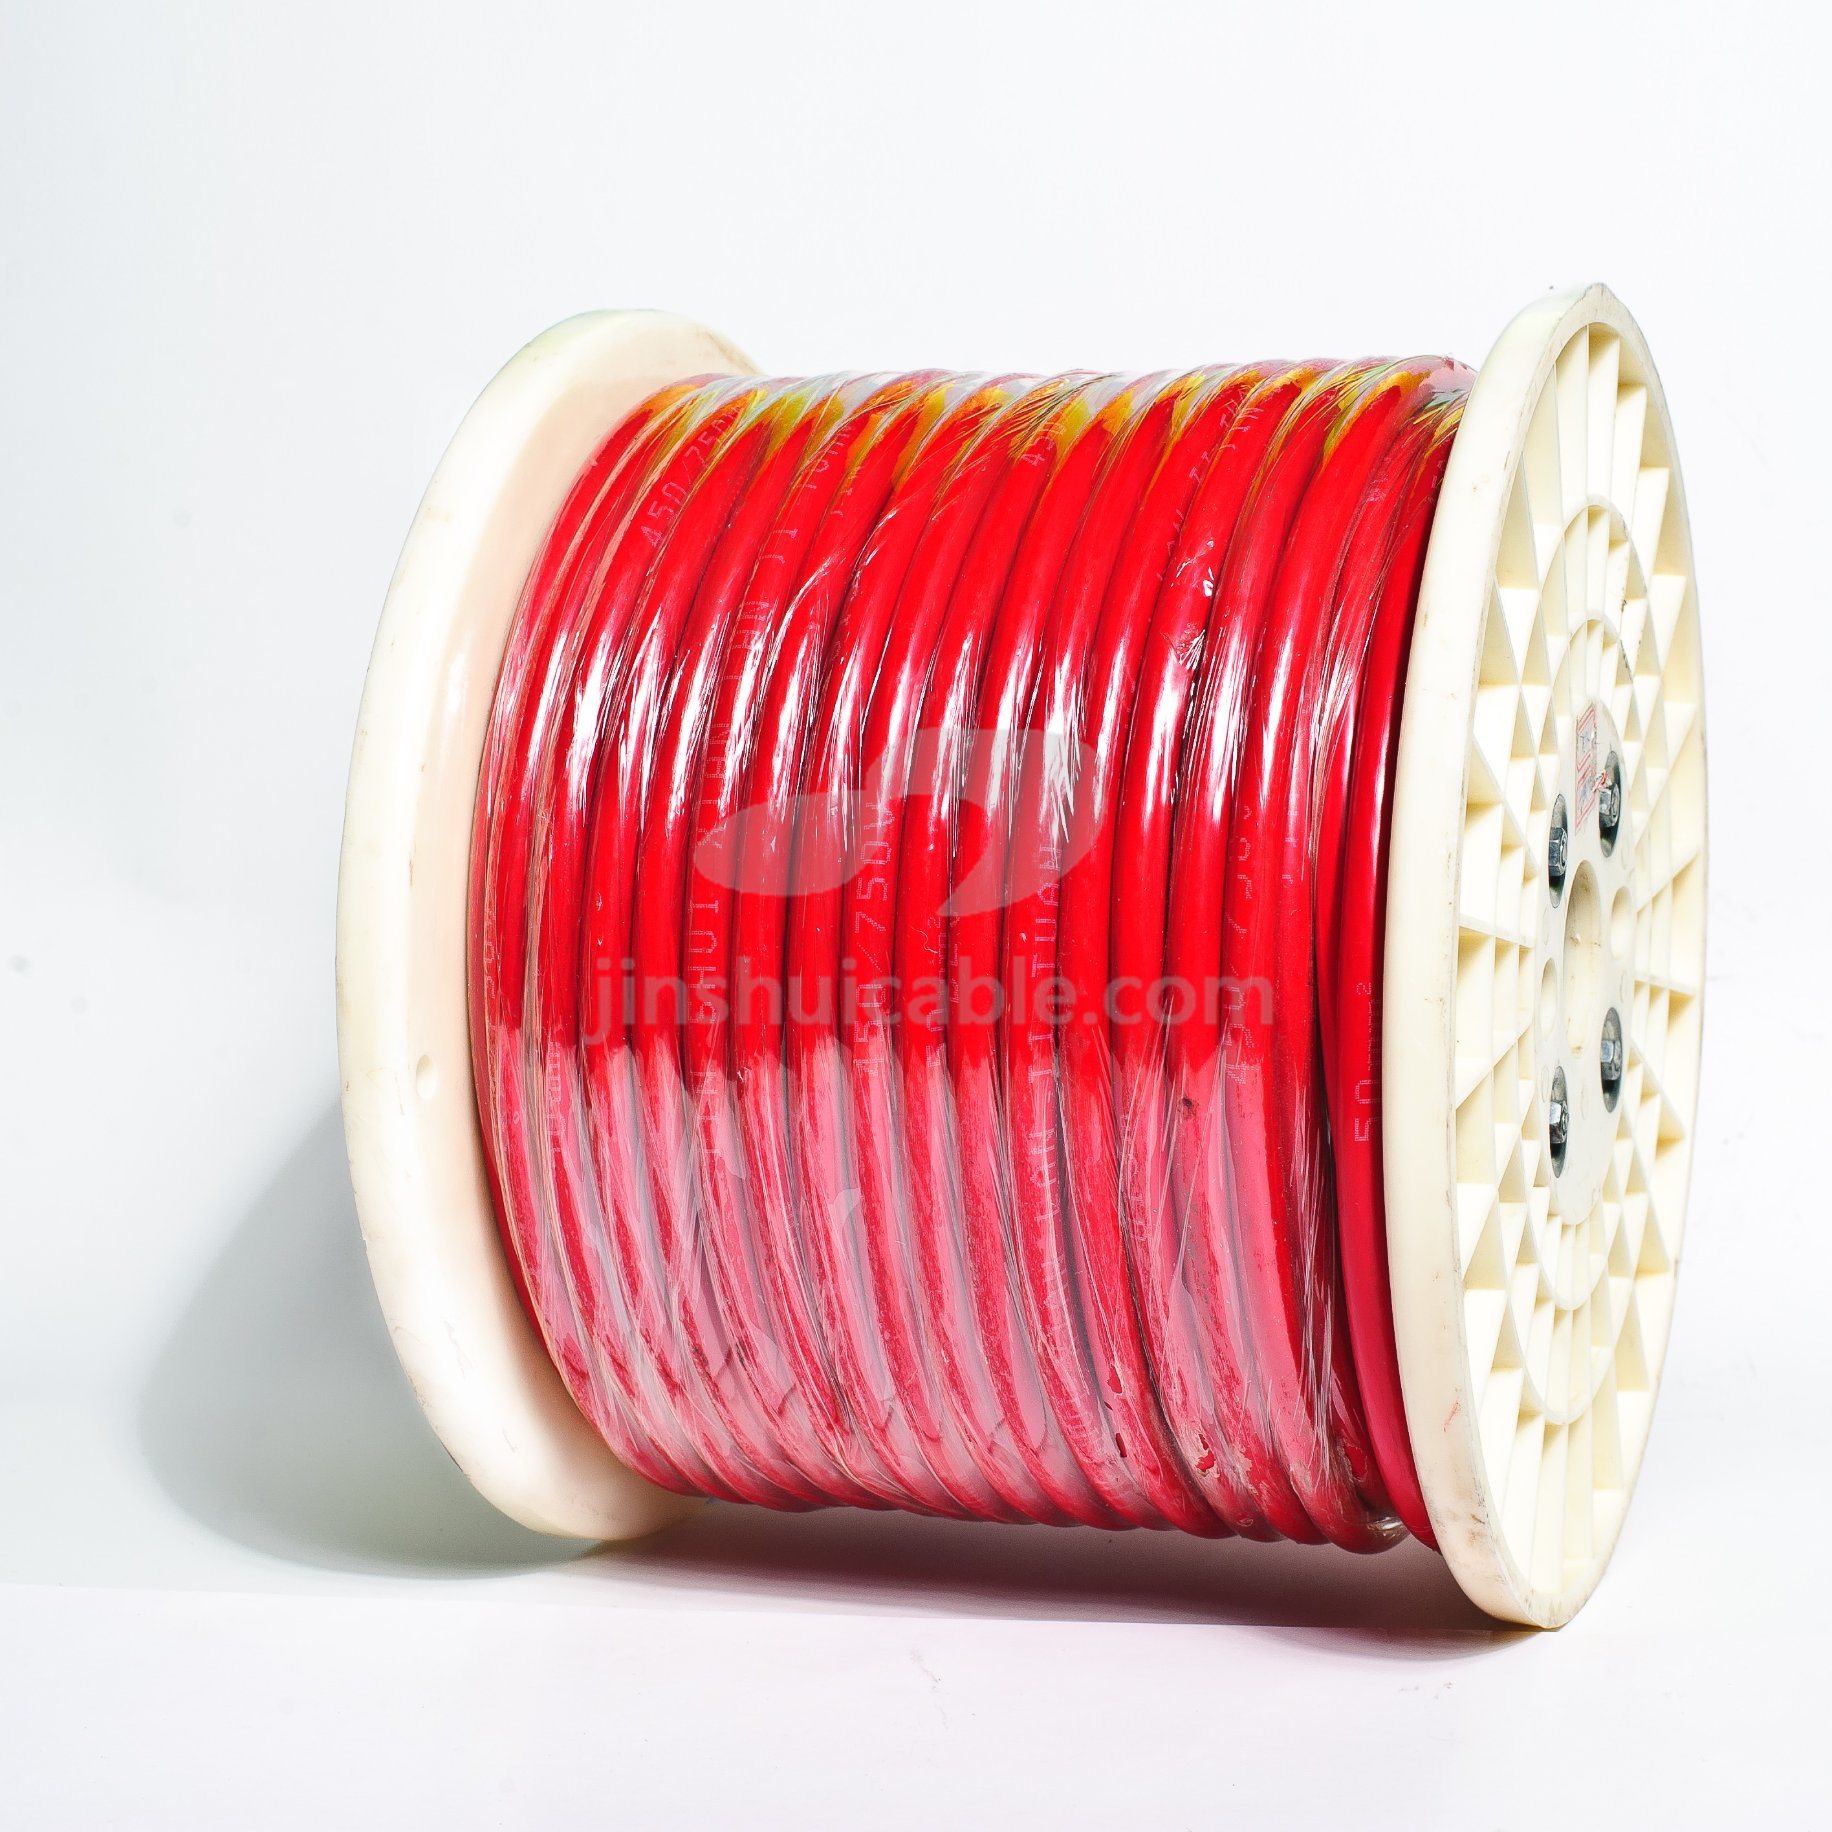 BV Bvr 1.5mm 2.5mm PVC Insulation Flexible Flame Retardant Electric Wire